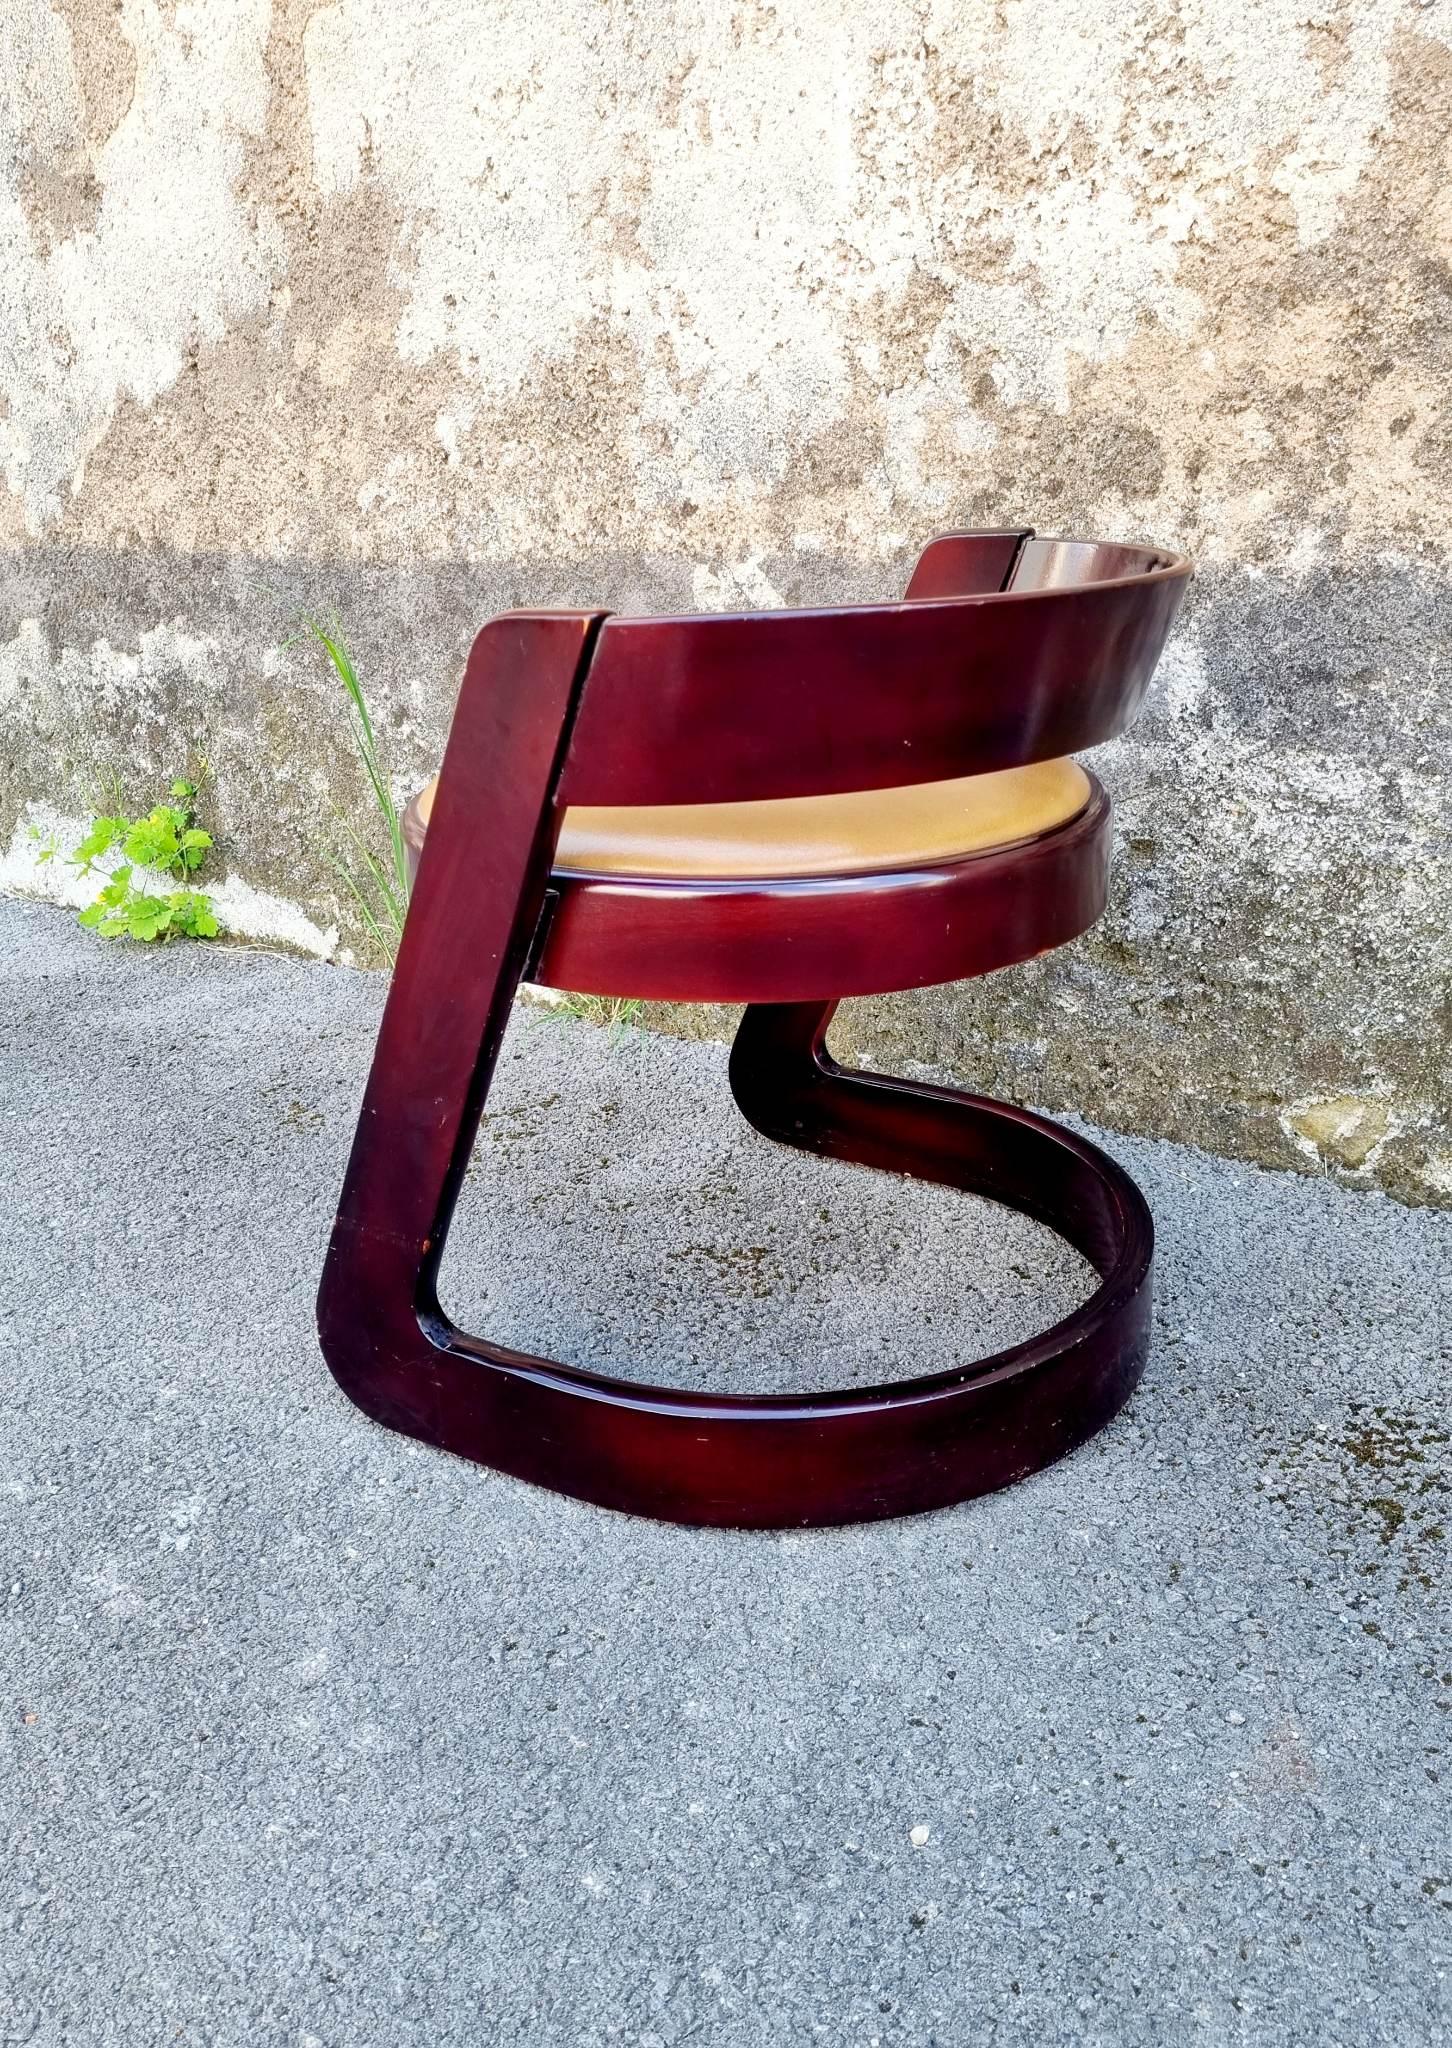 Rare Midcentury Stool by Willy Rizzo for Mario Sabot, Italy 70s For Sale 2